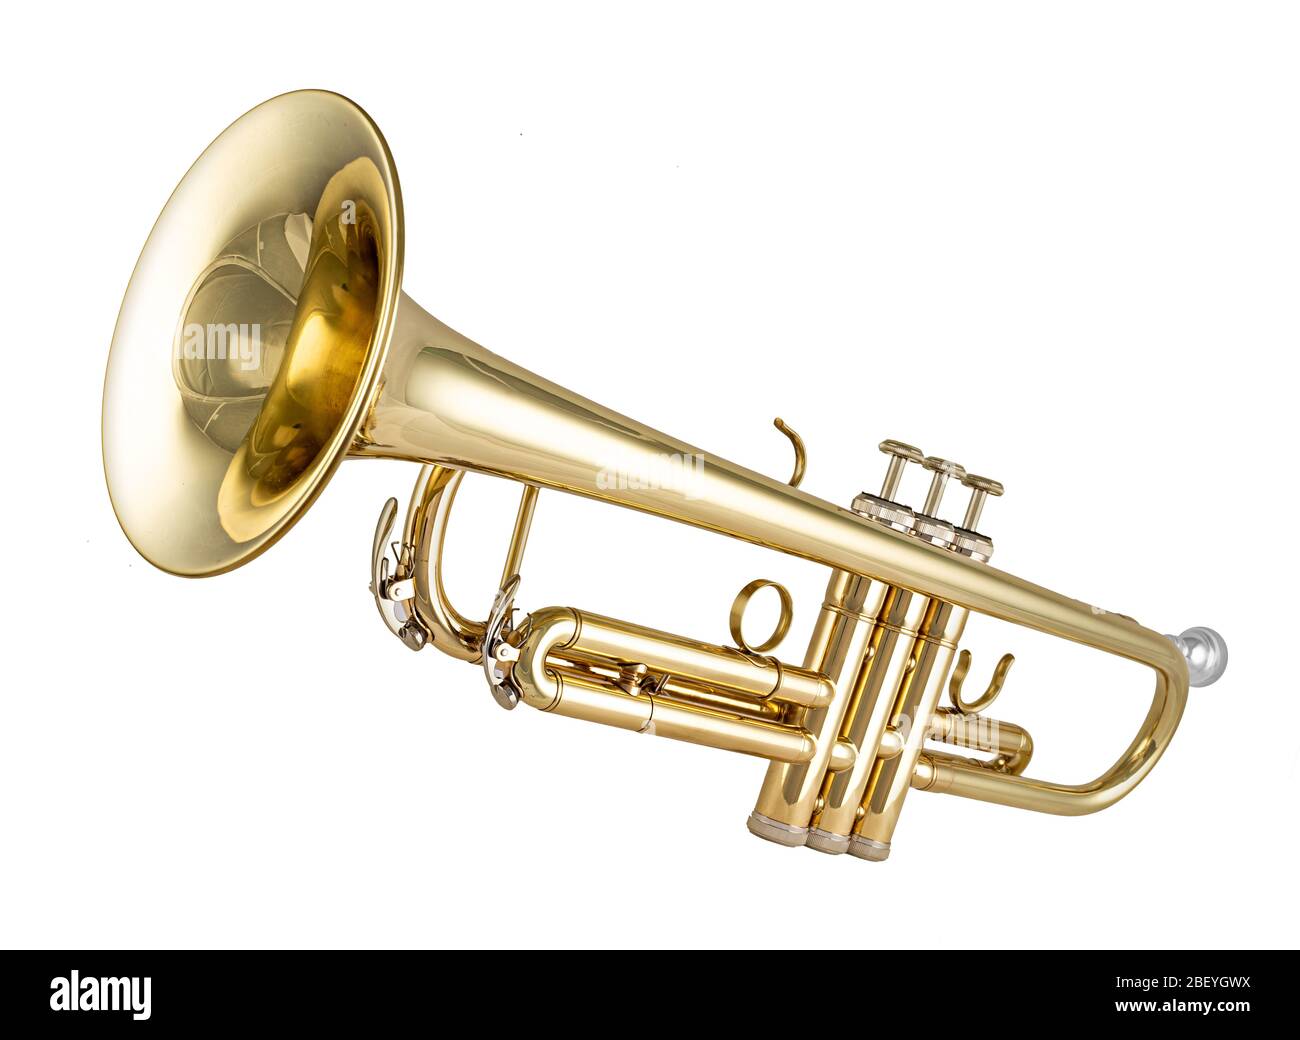 Golden shiny new metallic brass trumpet music instrument isolated on white background. musical equipment entertainment orchestra band concept. Stock Photo